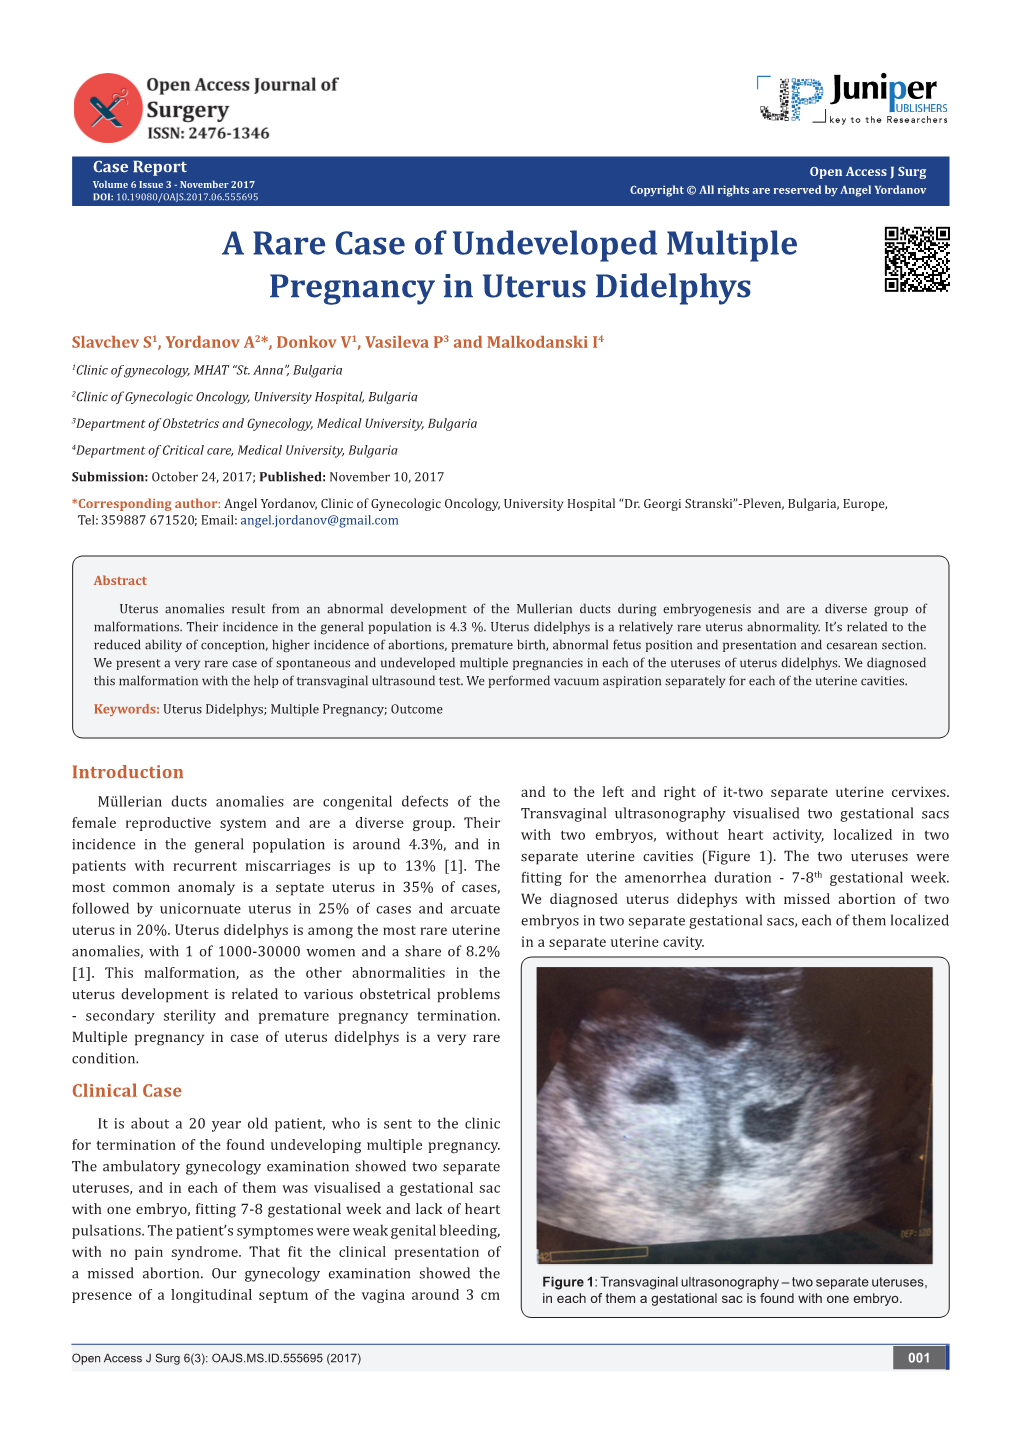 A Rare Case of Undeveloped Multiple Pregnancy in Uterus Didelphys